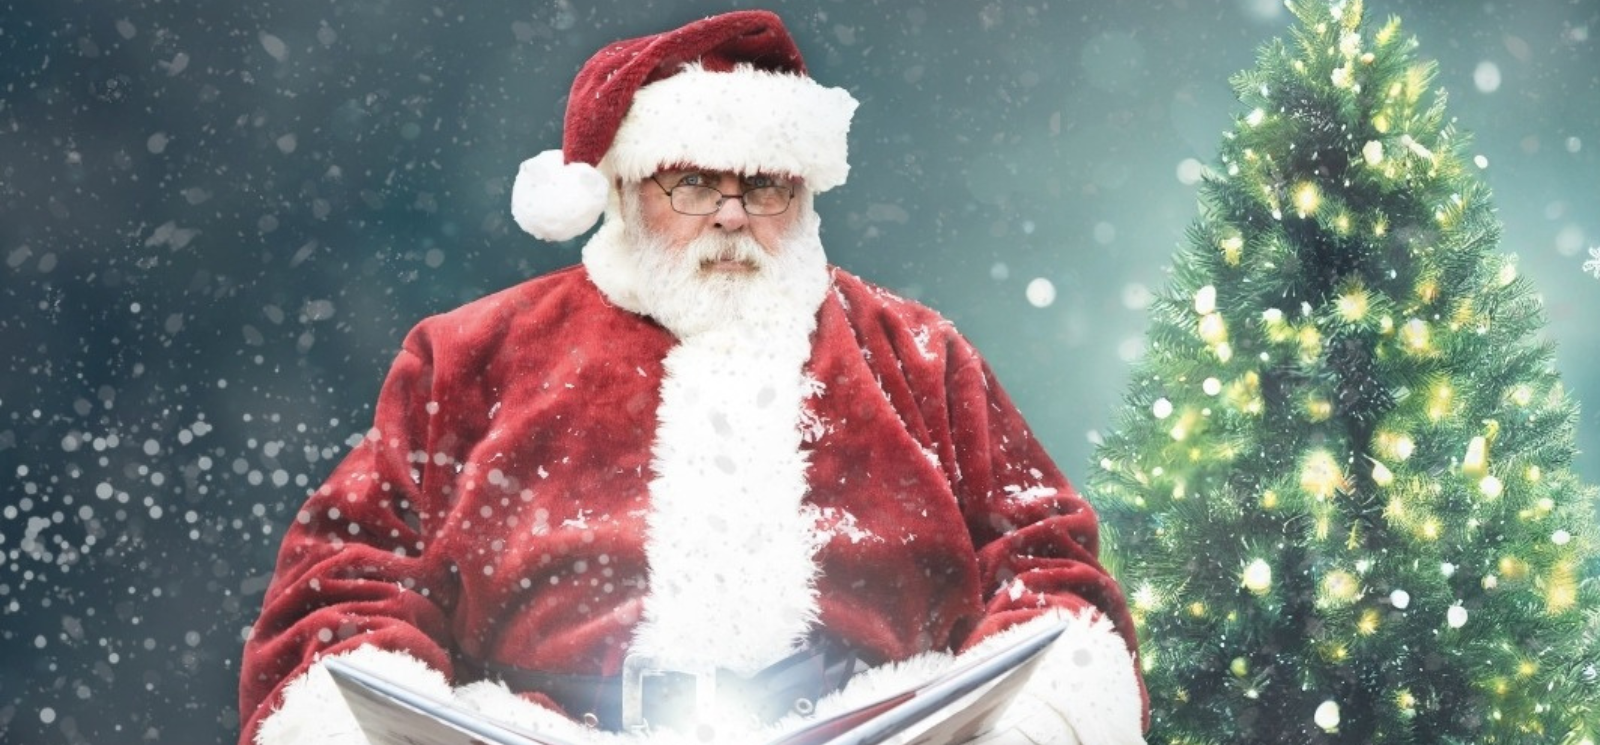 Santa reading a book. Christmas tree in the background. 